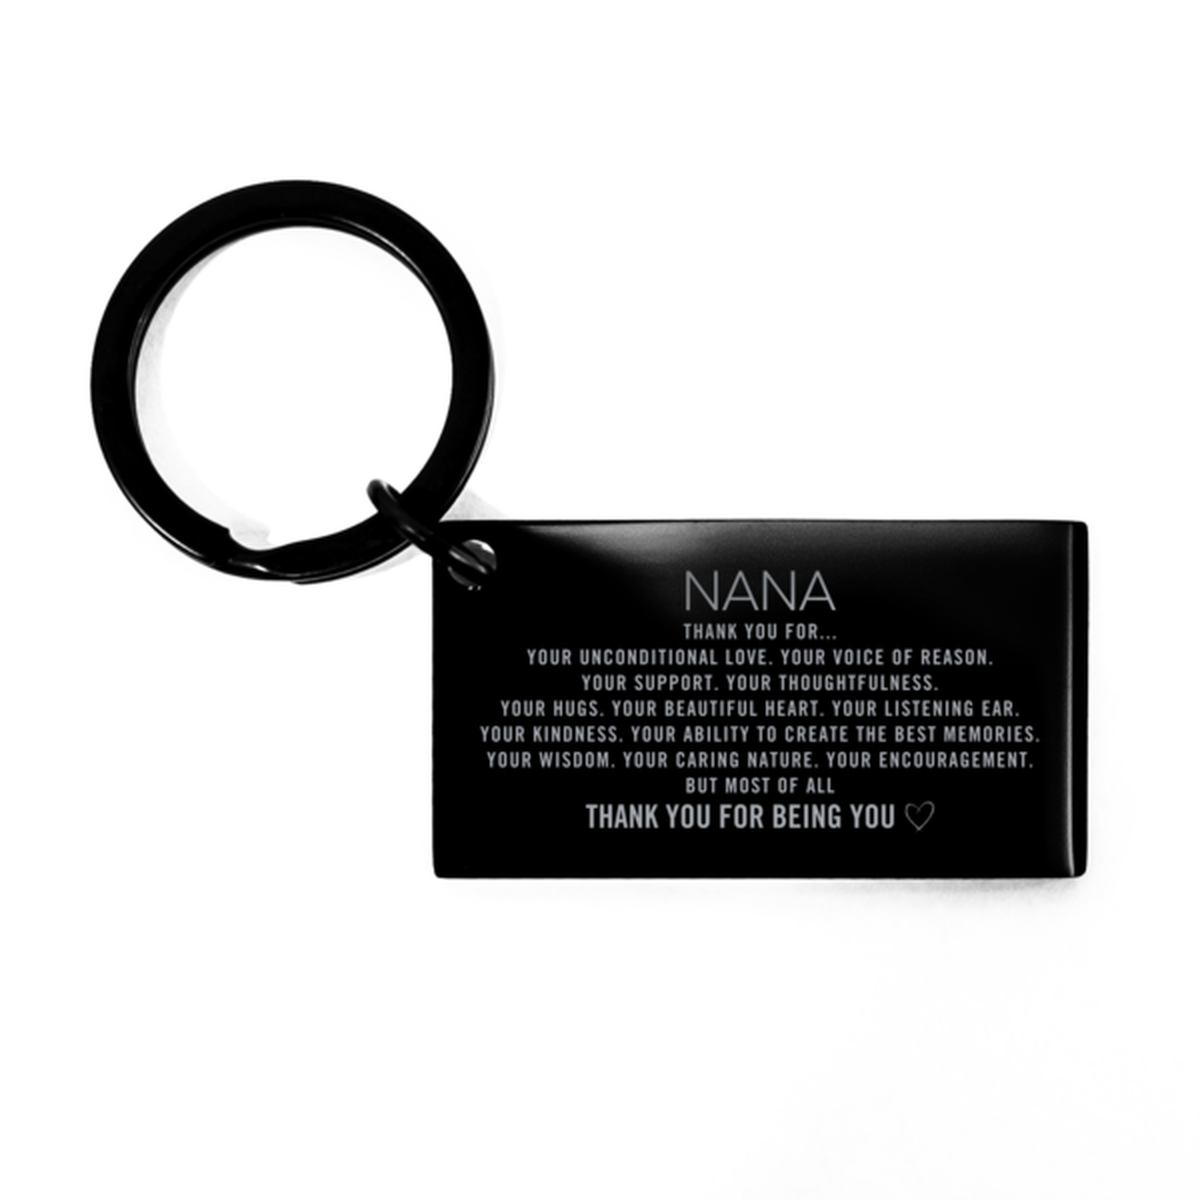 Nana Keychain Custom, Engraved Gifts For Nana Christmas Graduation Birthday Gifts for Men Women Nana Thank you for Your unconditional love